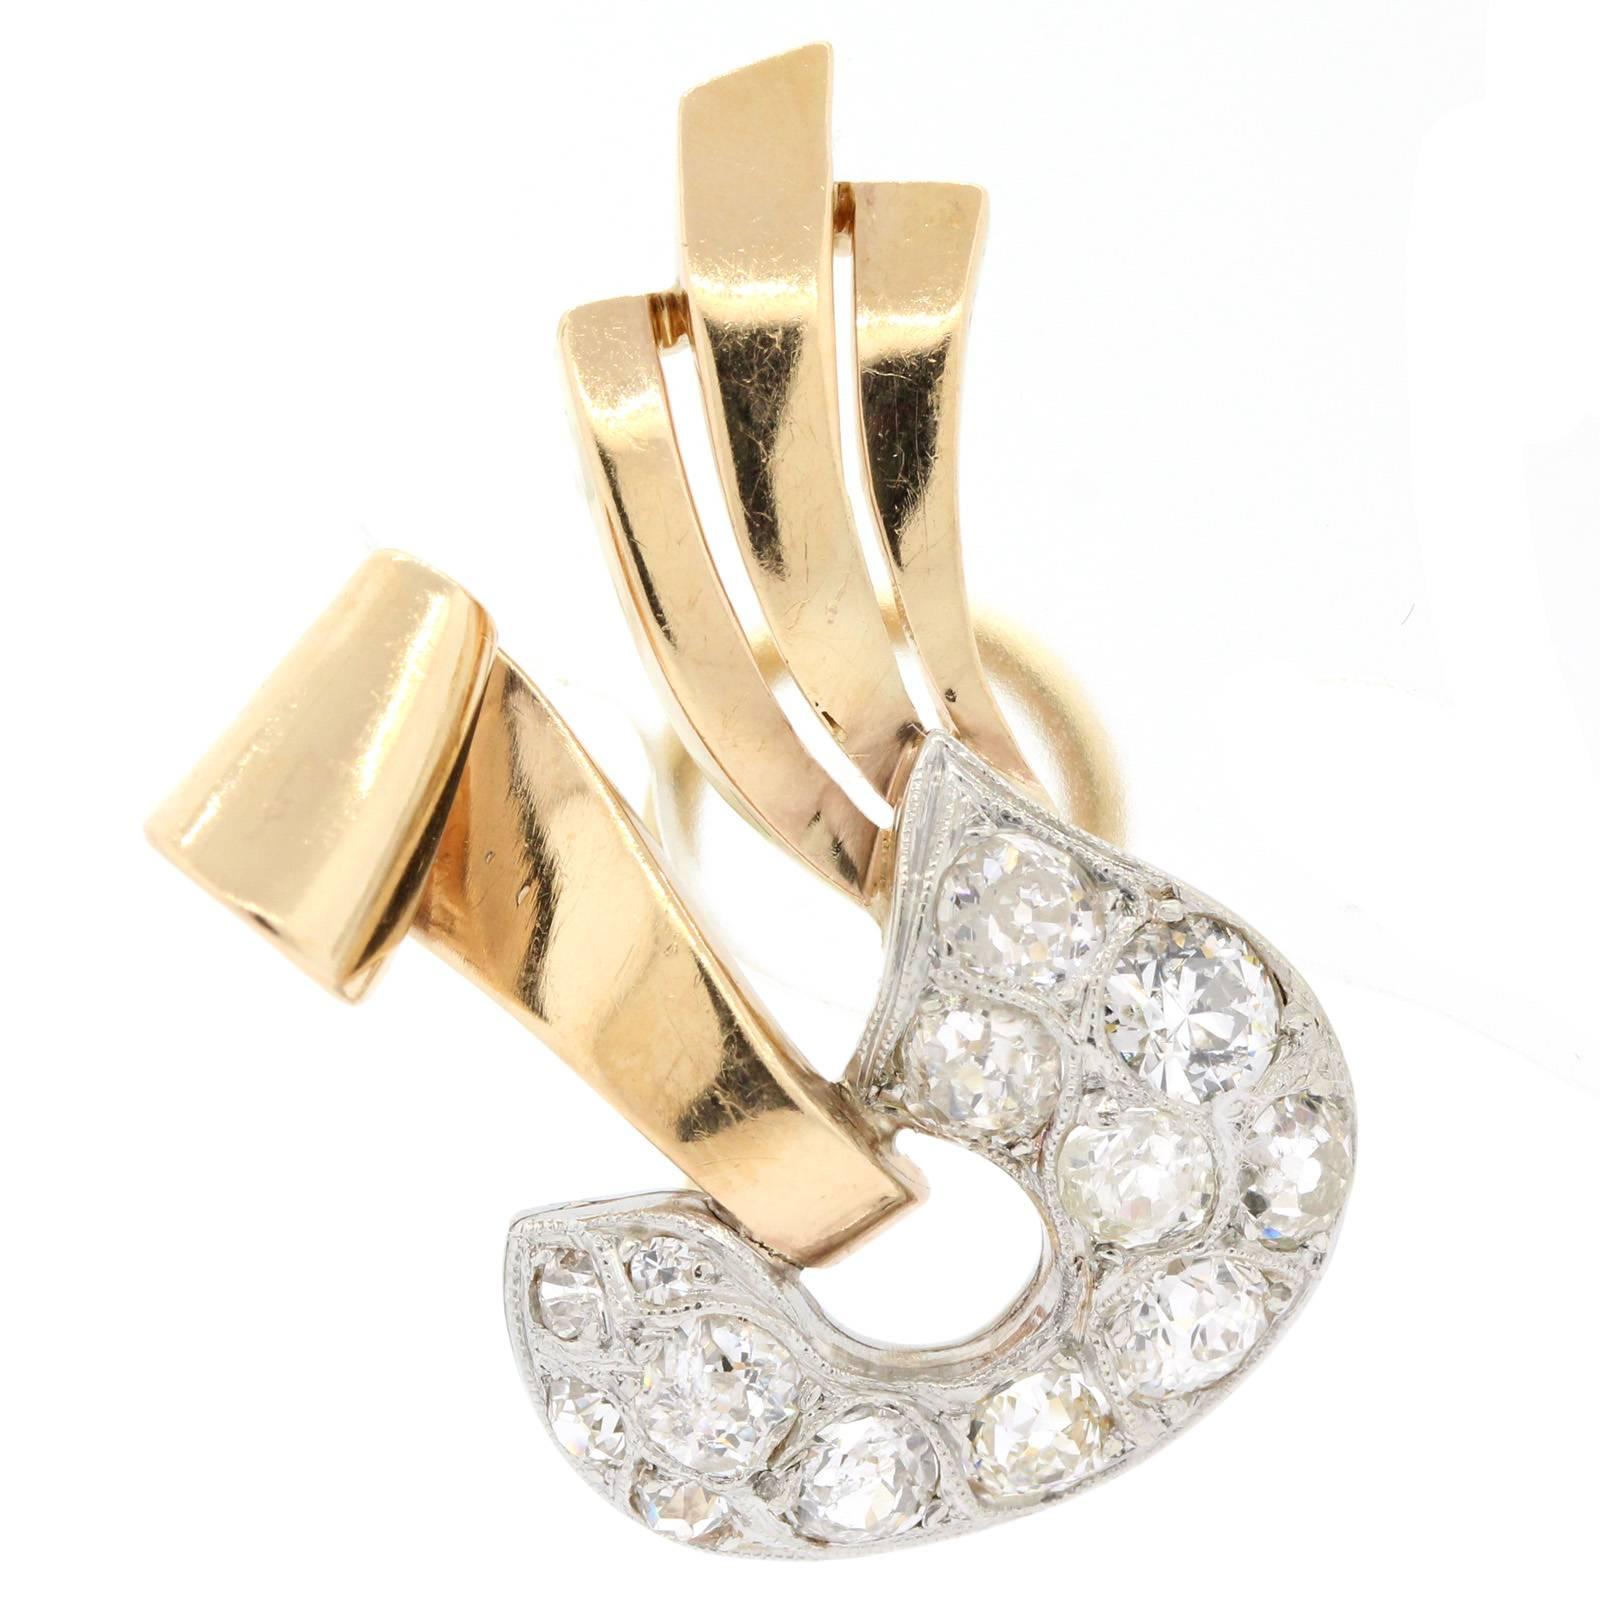 These Retro platinum and 14KT rose gold earrings are set with over four carats of old Mine and European Cut Diamonds  The designed like bows & ribbons pupping out sparkling basket!